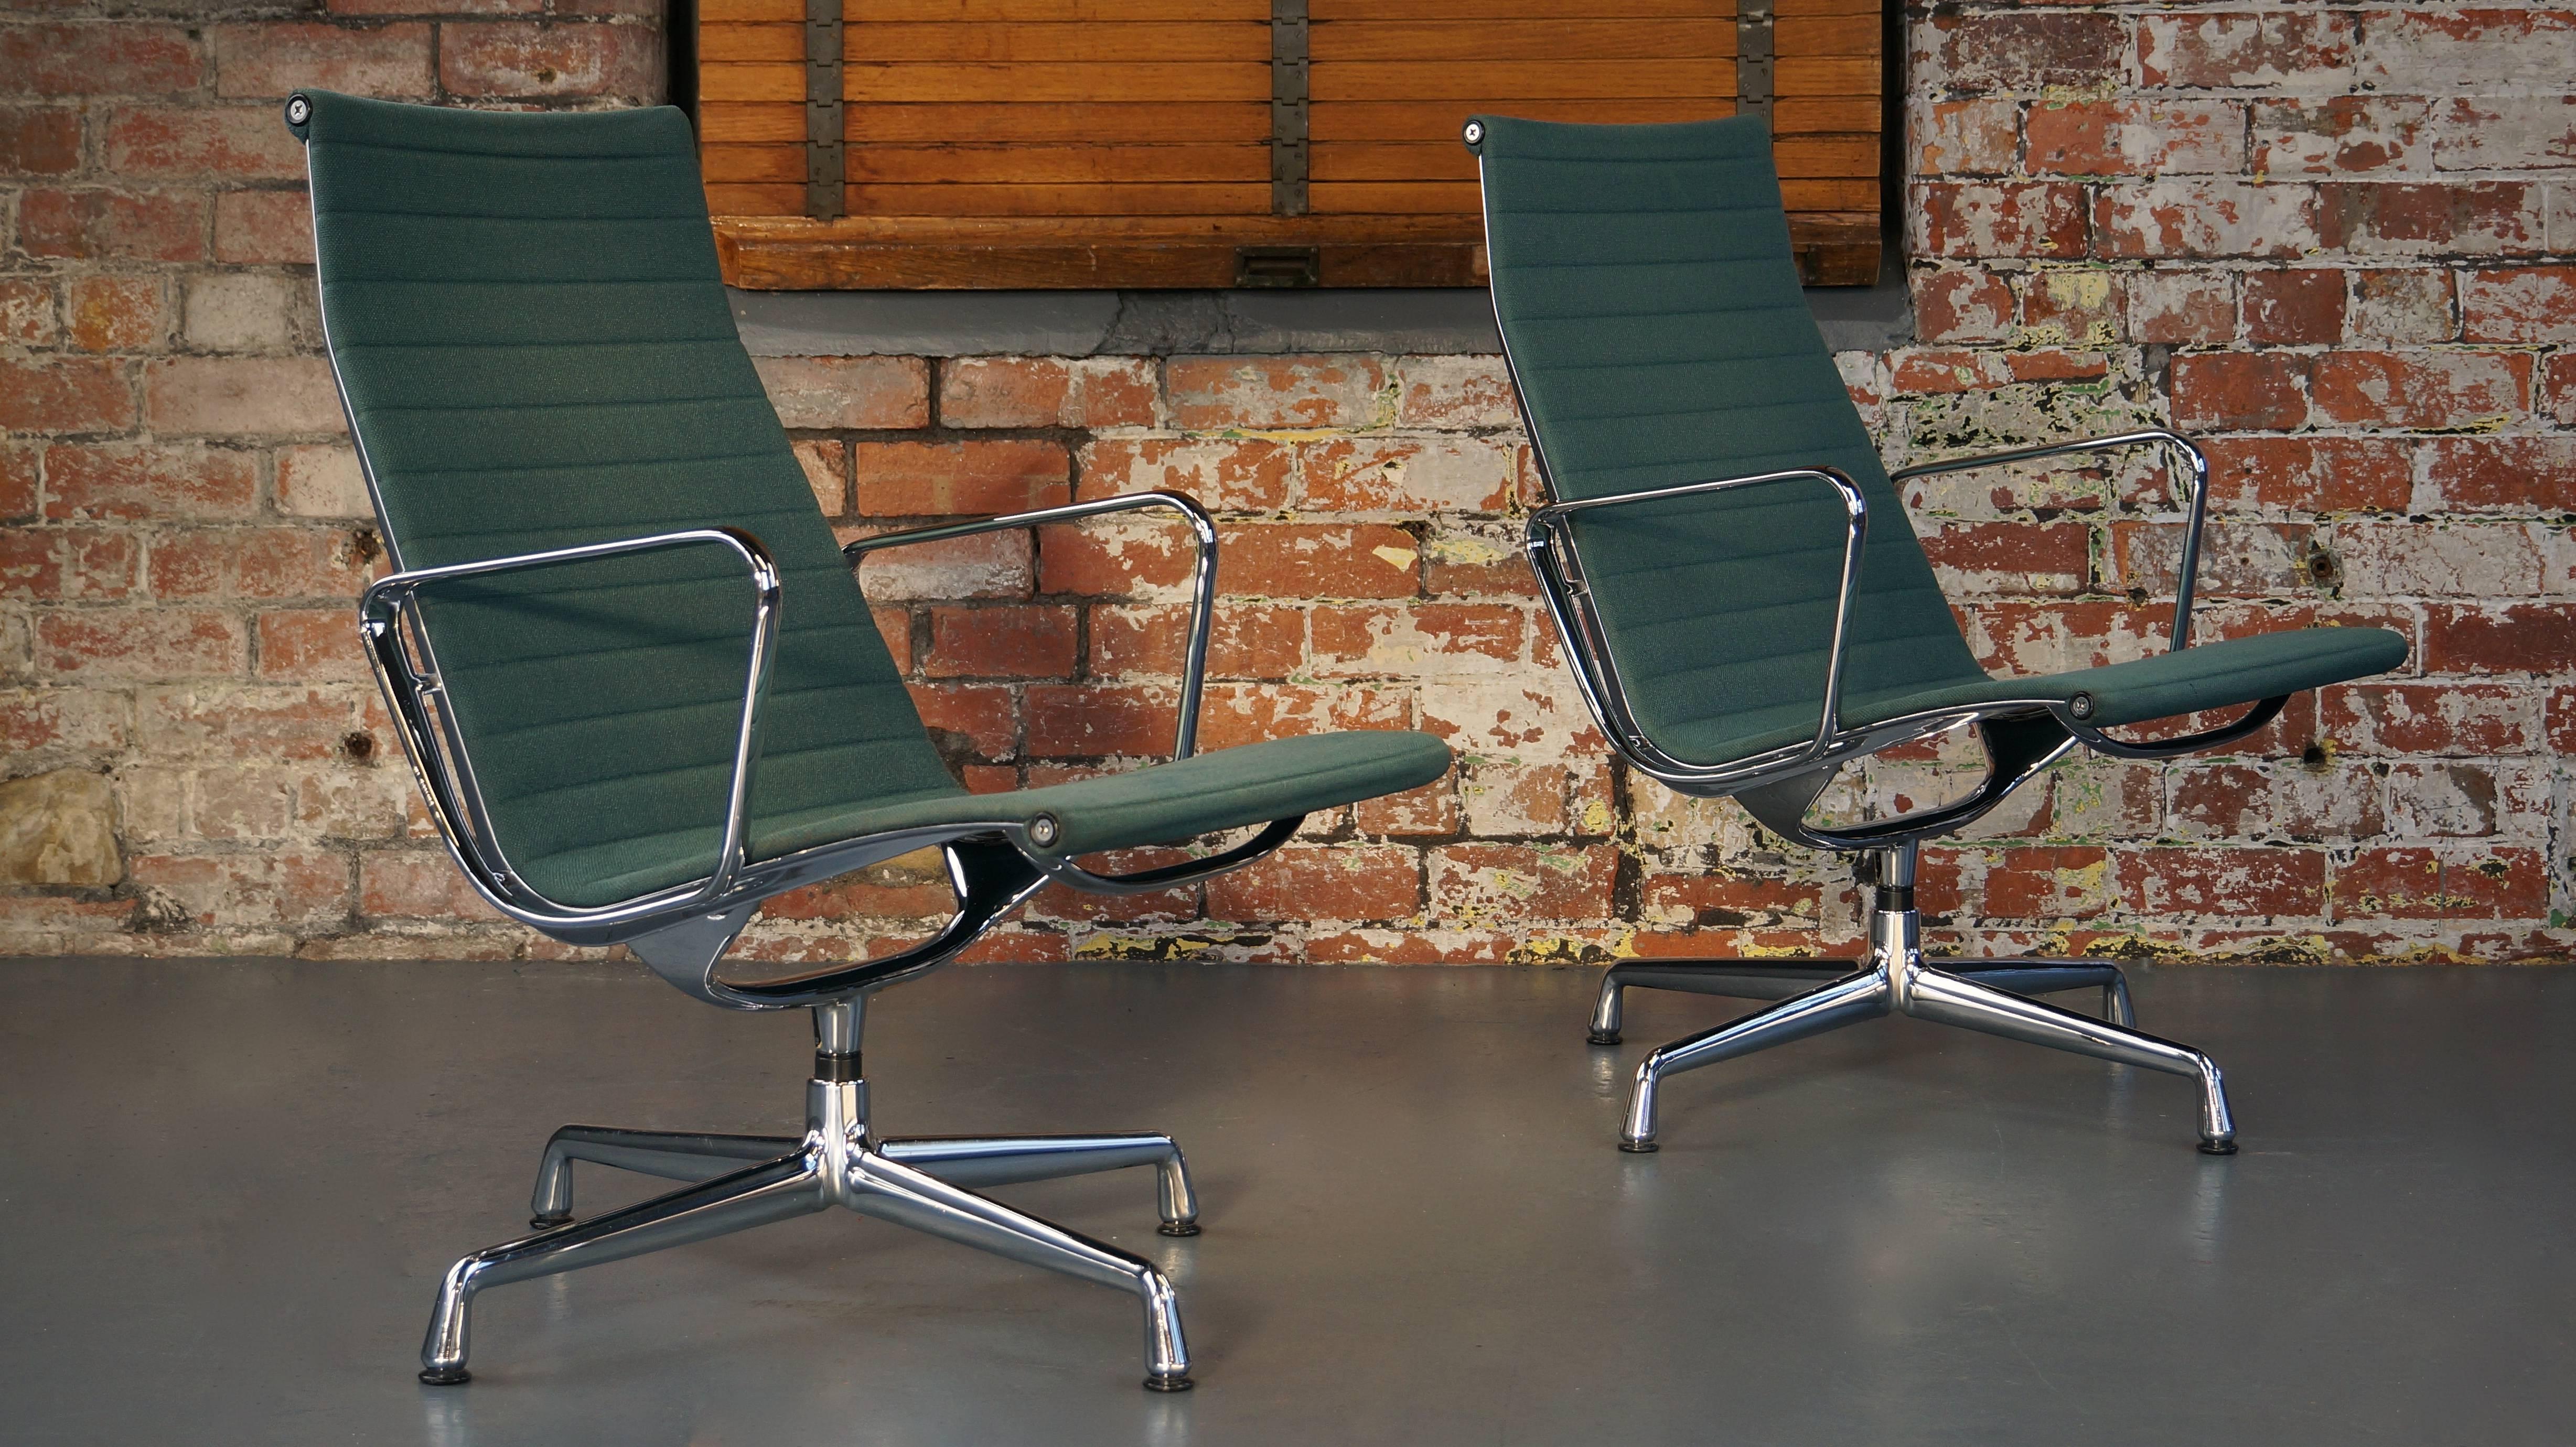 Mid-20th Century Charles Eames EA 116 Hopsack Lounge Chairs Teal Green Blue Vintage Midcentury